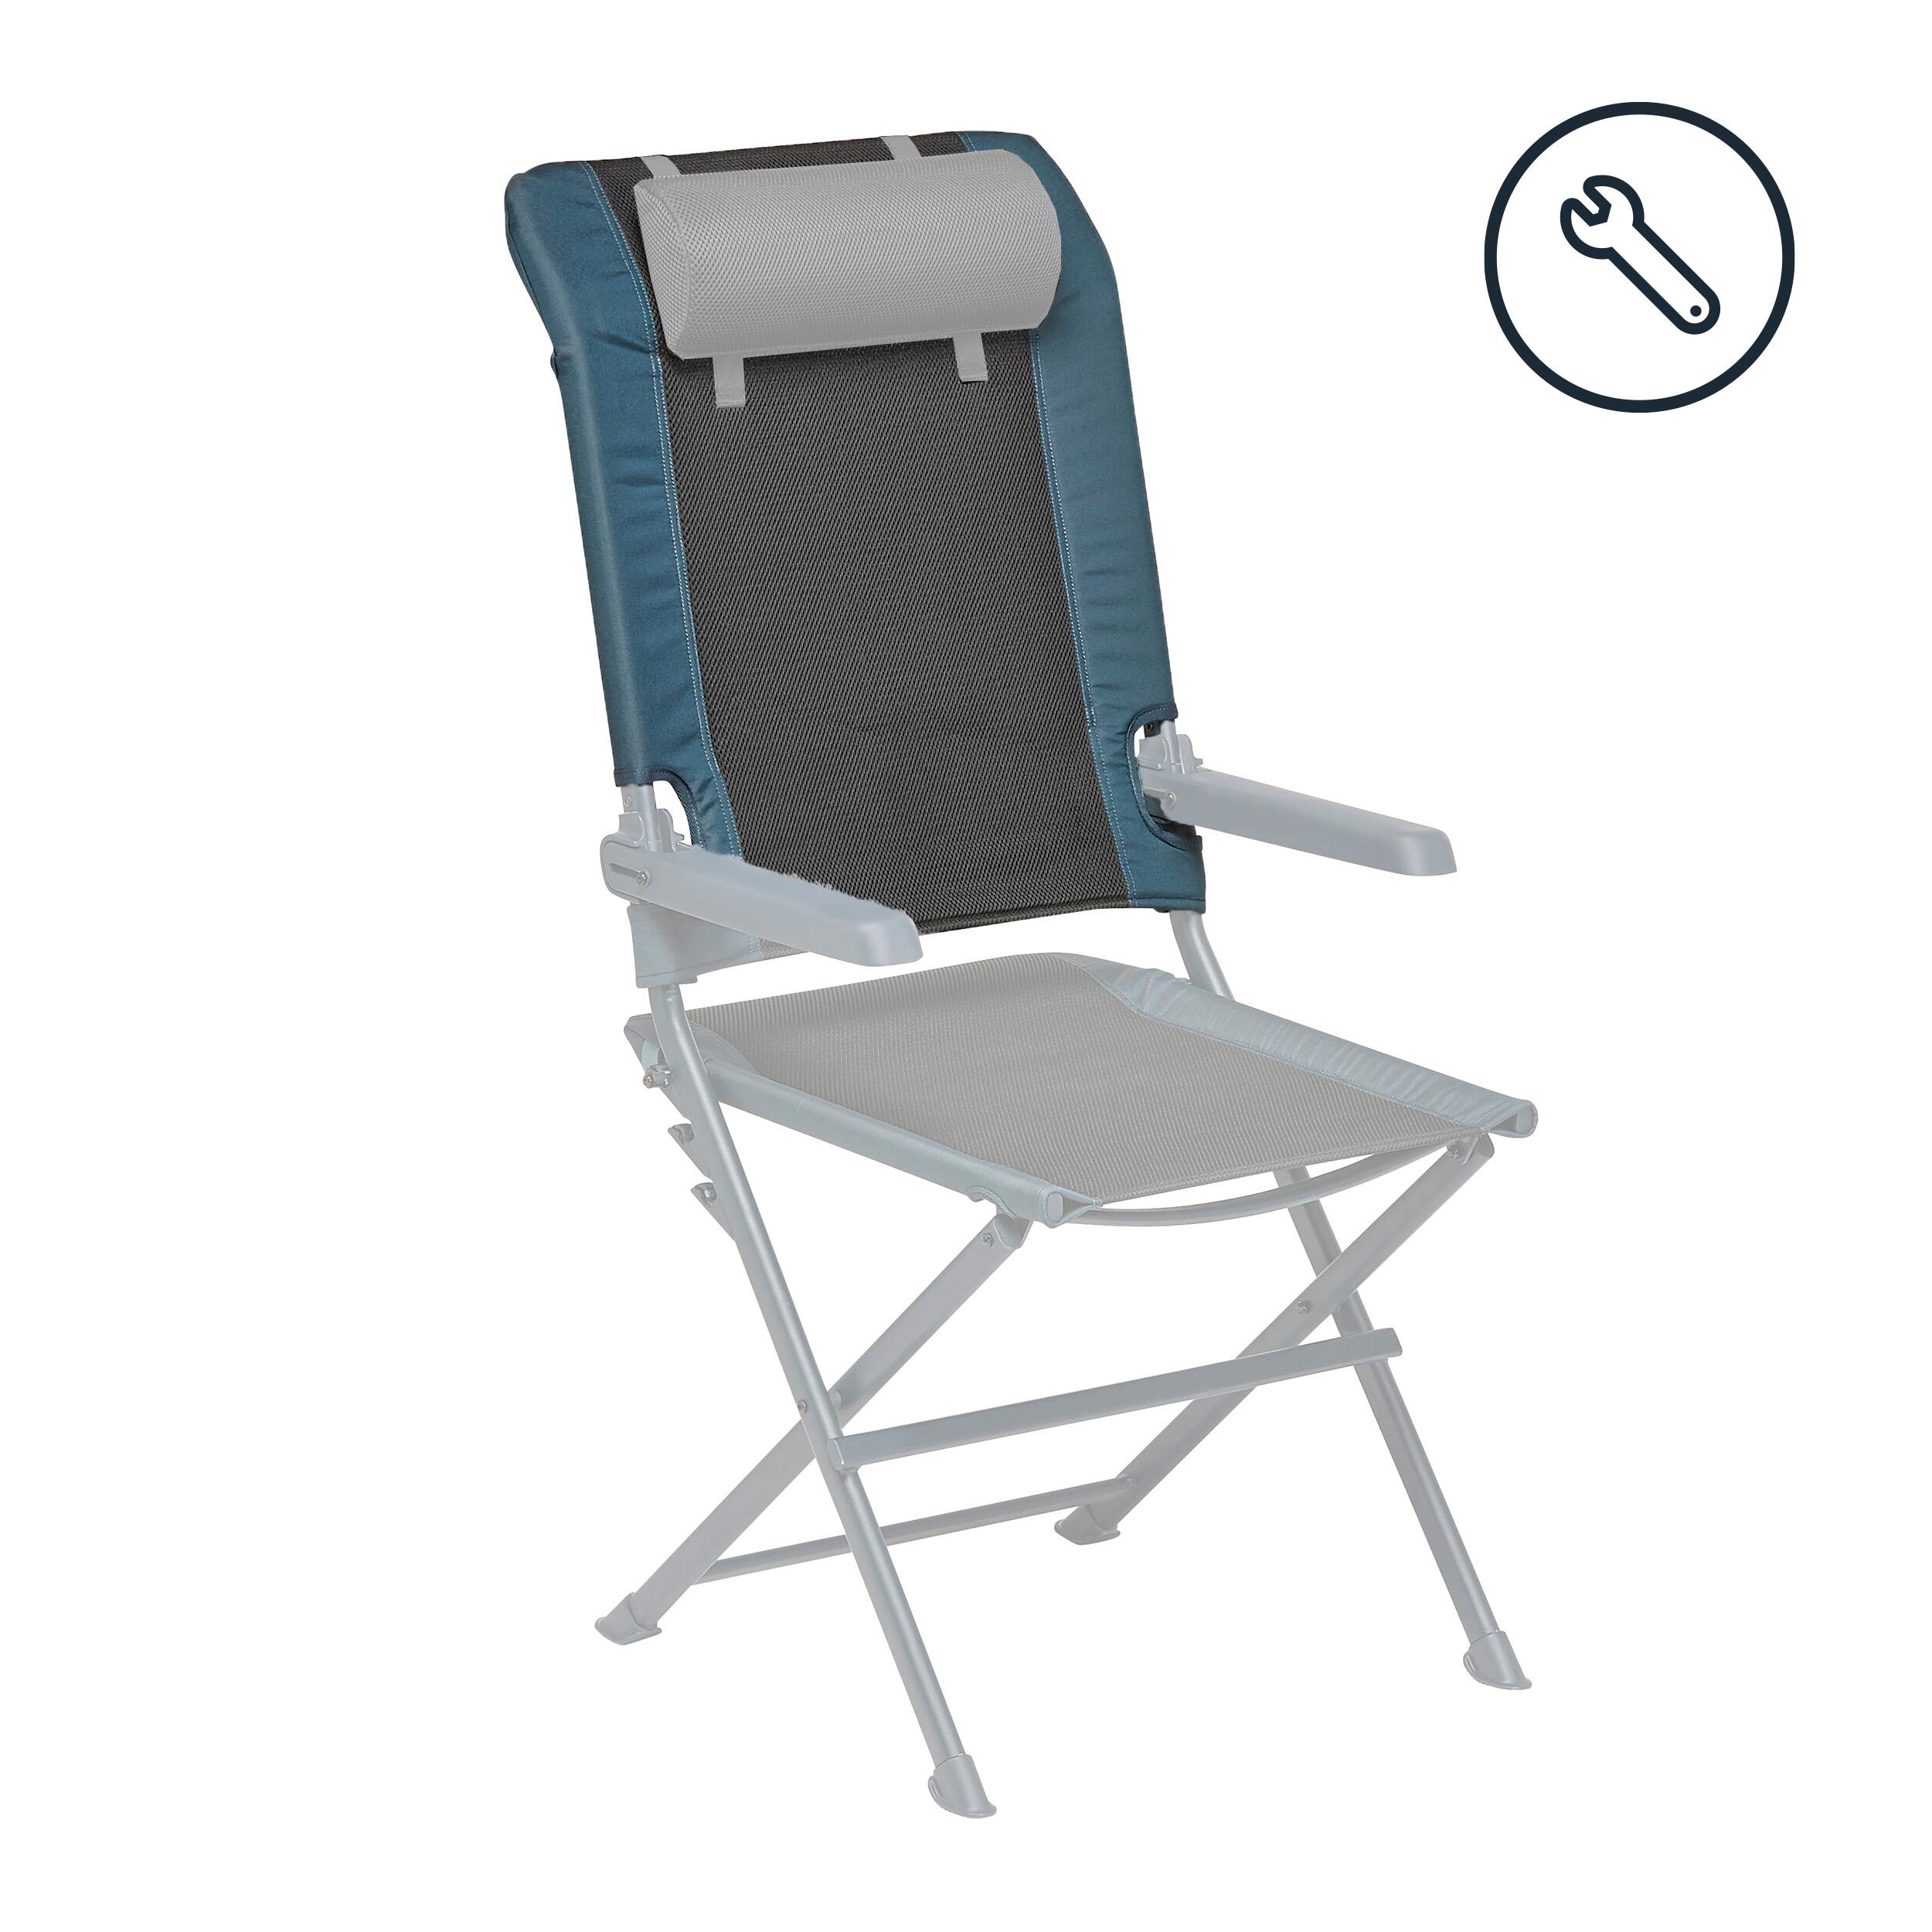 QUECHUA REPLACEMENT BACKREST - SPARE PART FOR CHILL MEAL MULTIPOSIT CHAIR